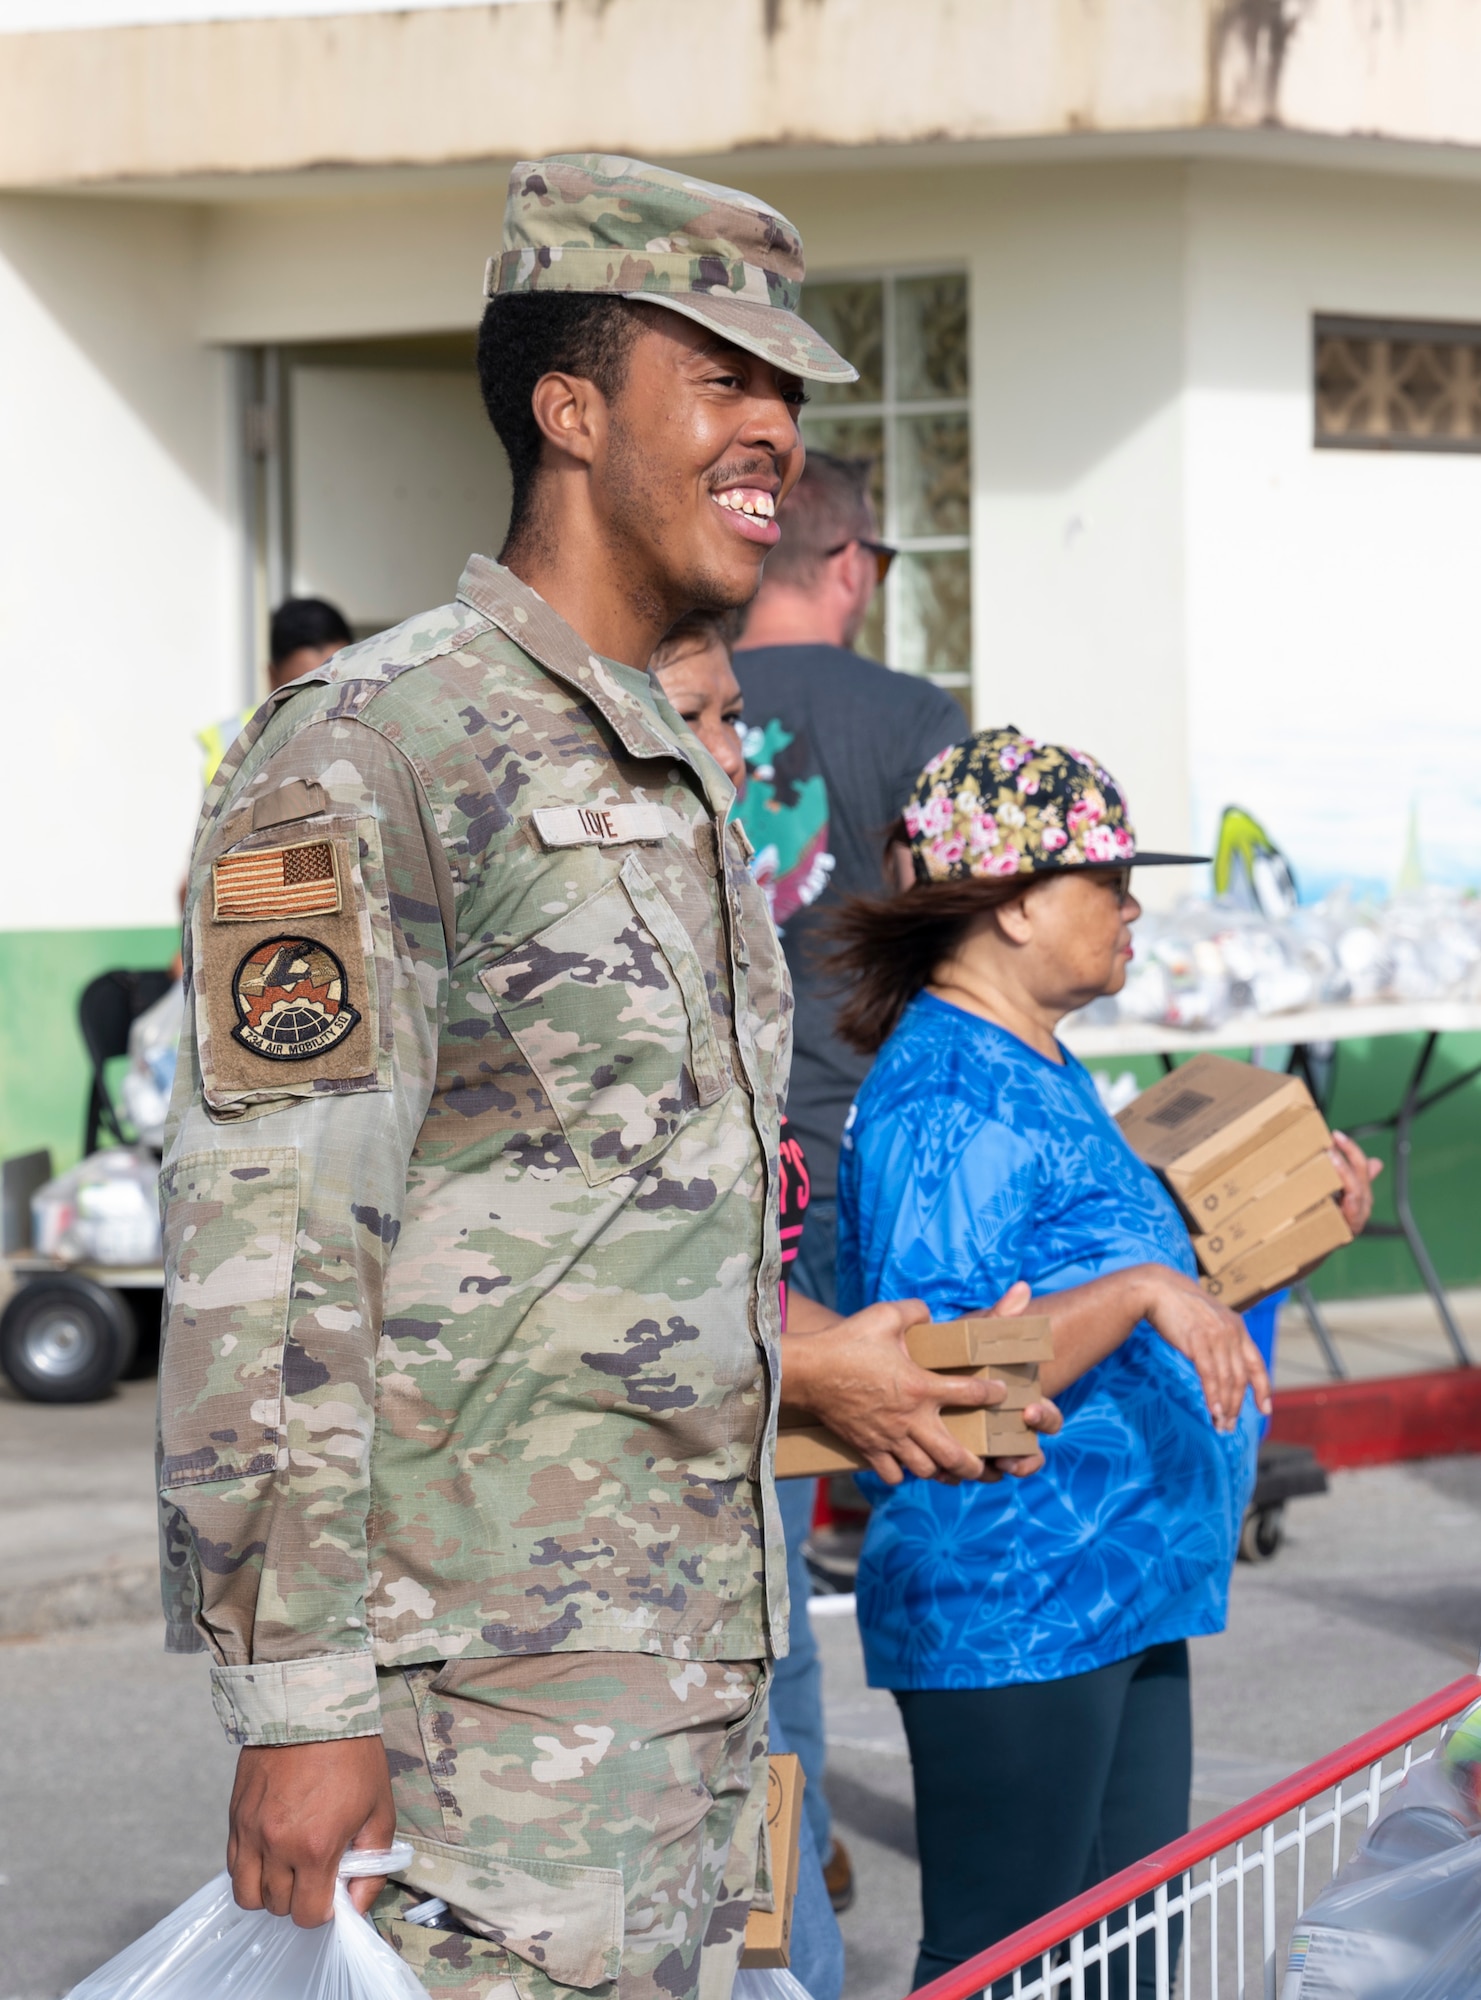 U.S. Air Force Staff Sgt. Christian Love, 734th Air Mobility Squadron commander support staff noncommissioned officer in charge, waits to give food to a local family at a volunteer event in Dededo, Guam, December 15, 2023.  The 734 AMS volunteered to help Dededo as part of the Sister Village Sister Squadron program. They collected food, toiletry, and lifesaving equipment donations and helped hand them out to local families. (U.S. Air Force photo by Airman 1st Class Spencer Perkins)